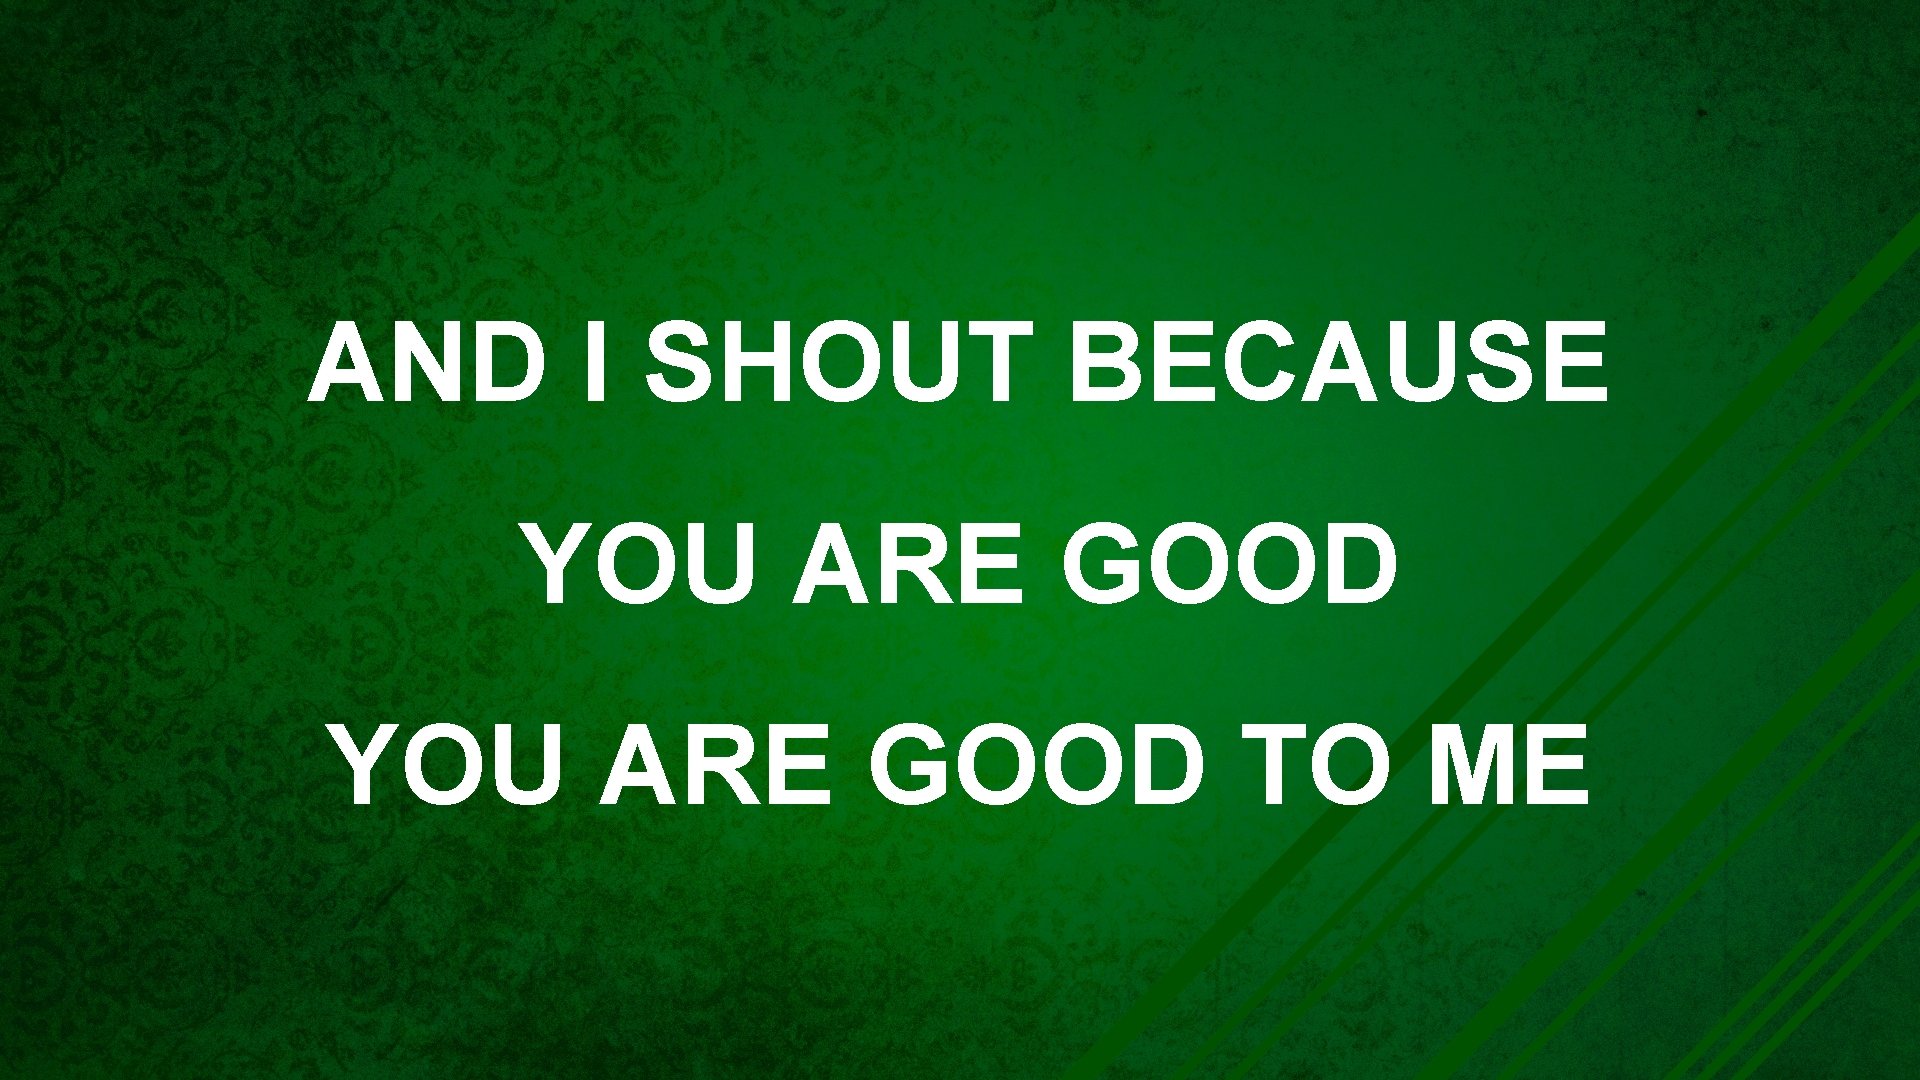 AND I SHOUT BECAUSE YOU ARE GOOD TO ME 